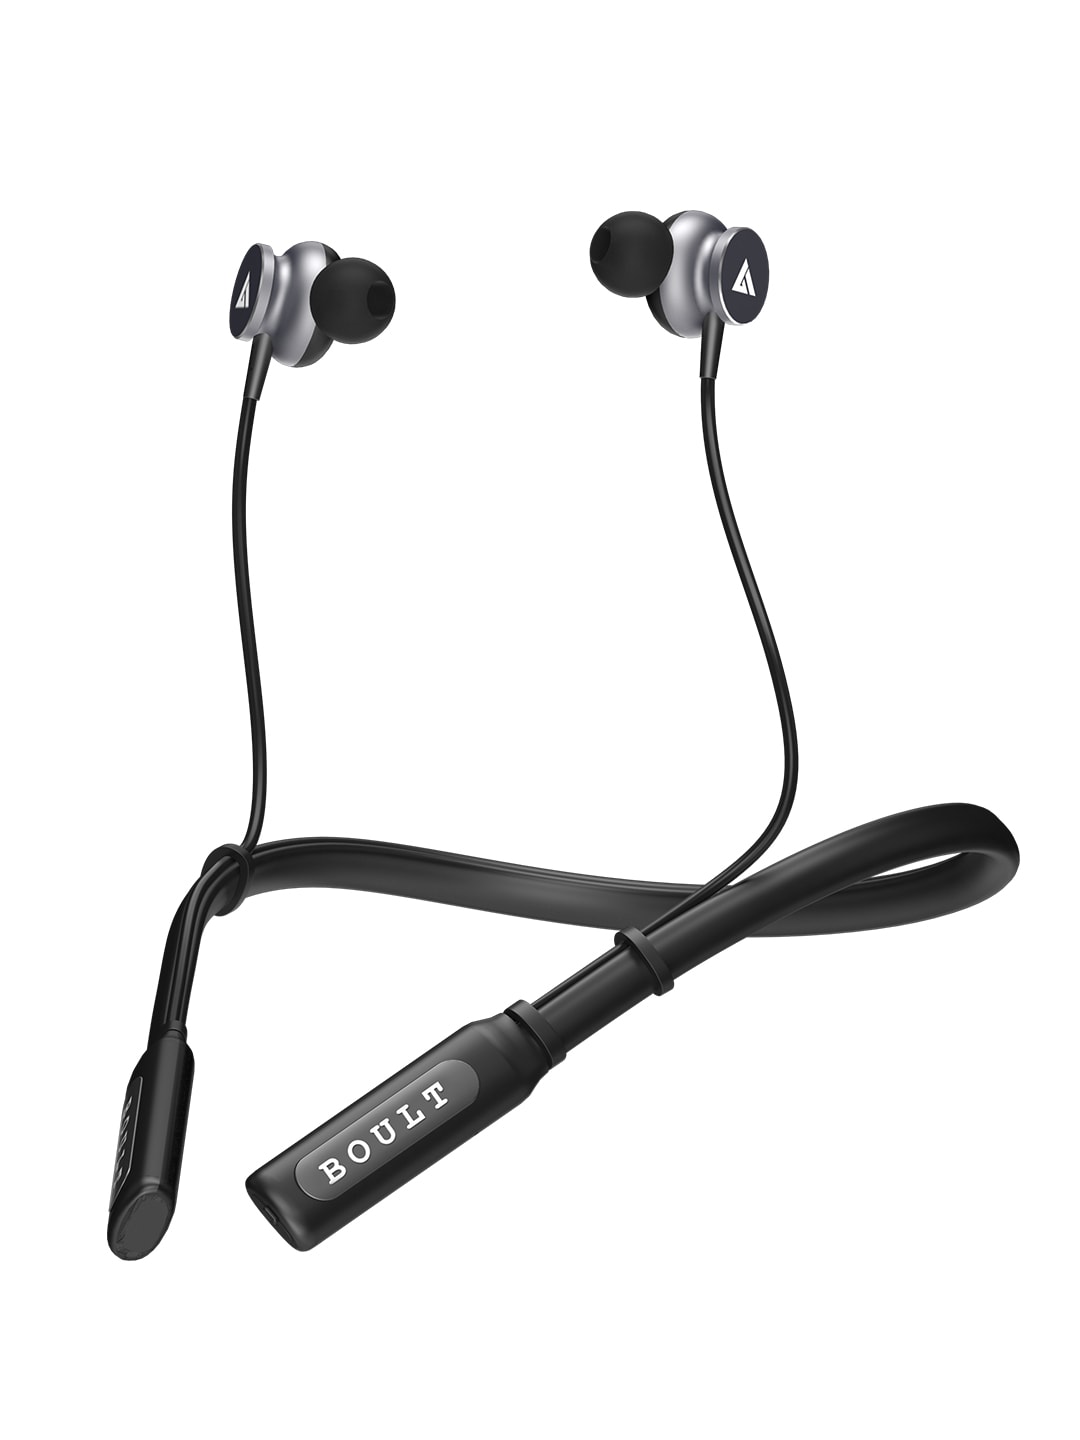 BOULT AUDIO ProBass Curve In-Ear Wireless Bluetooth Earphones - Black Price in India